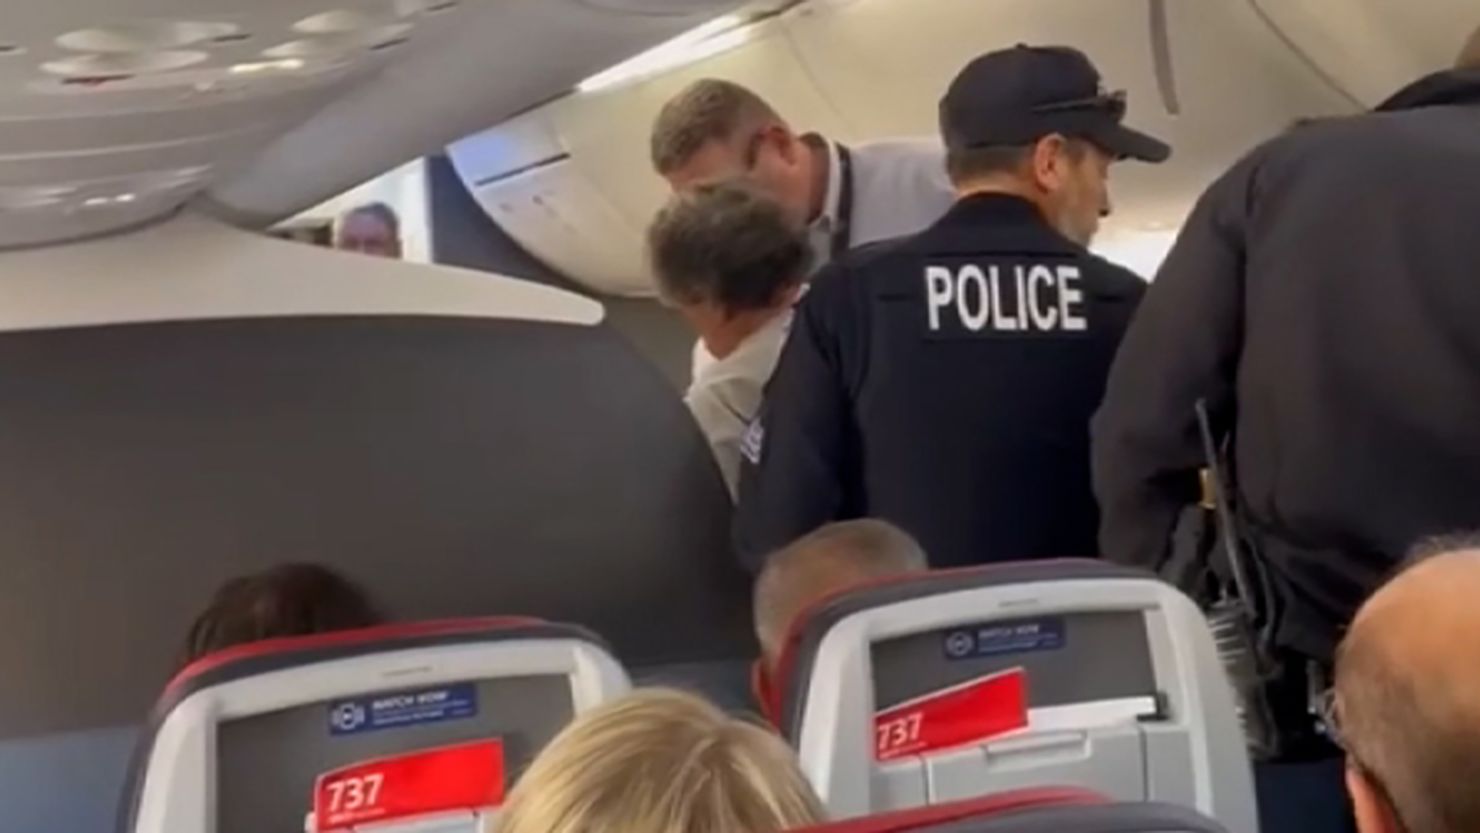 An American Airlines flight was diverted to a Texas airport after a passenger punched a flight attendant multiple times and assaulted at least one police officer, according to court documents.